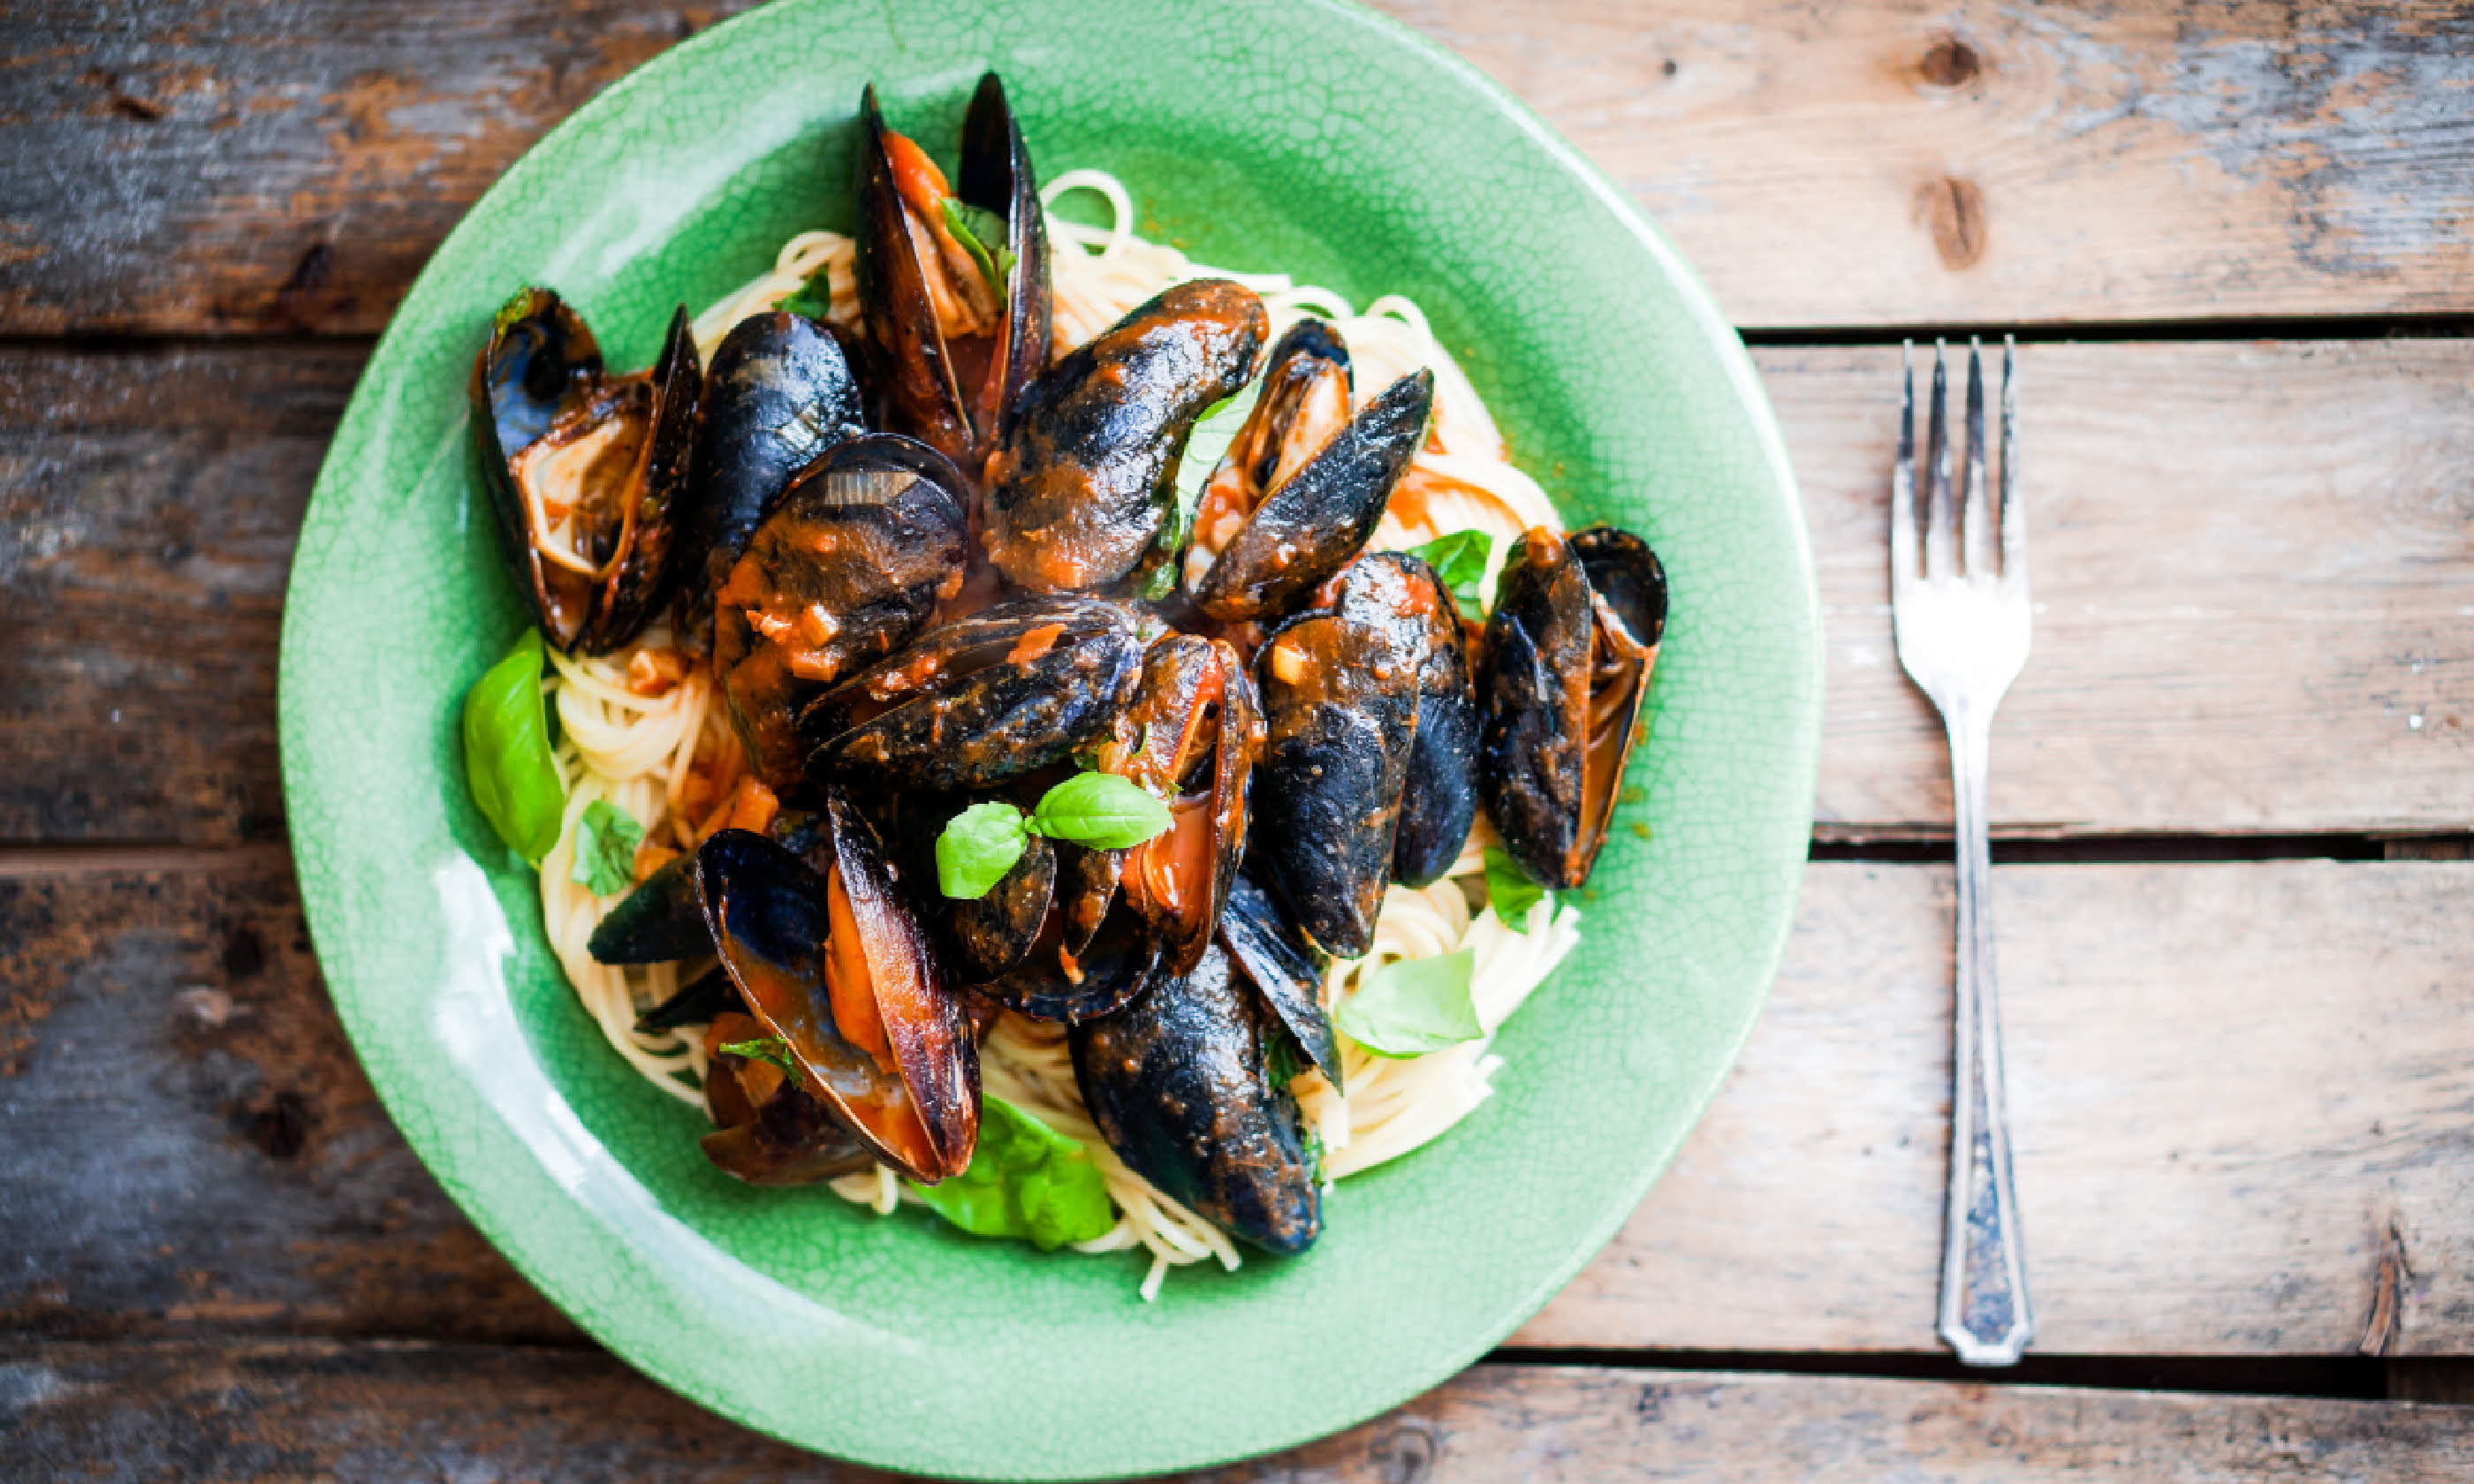 Pasta with mussels and basil (Shutterstock: see credit below)